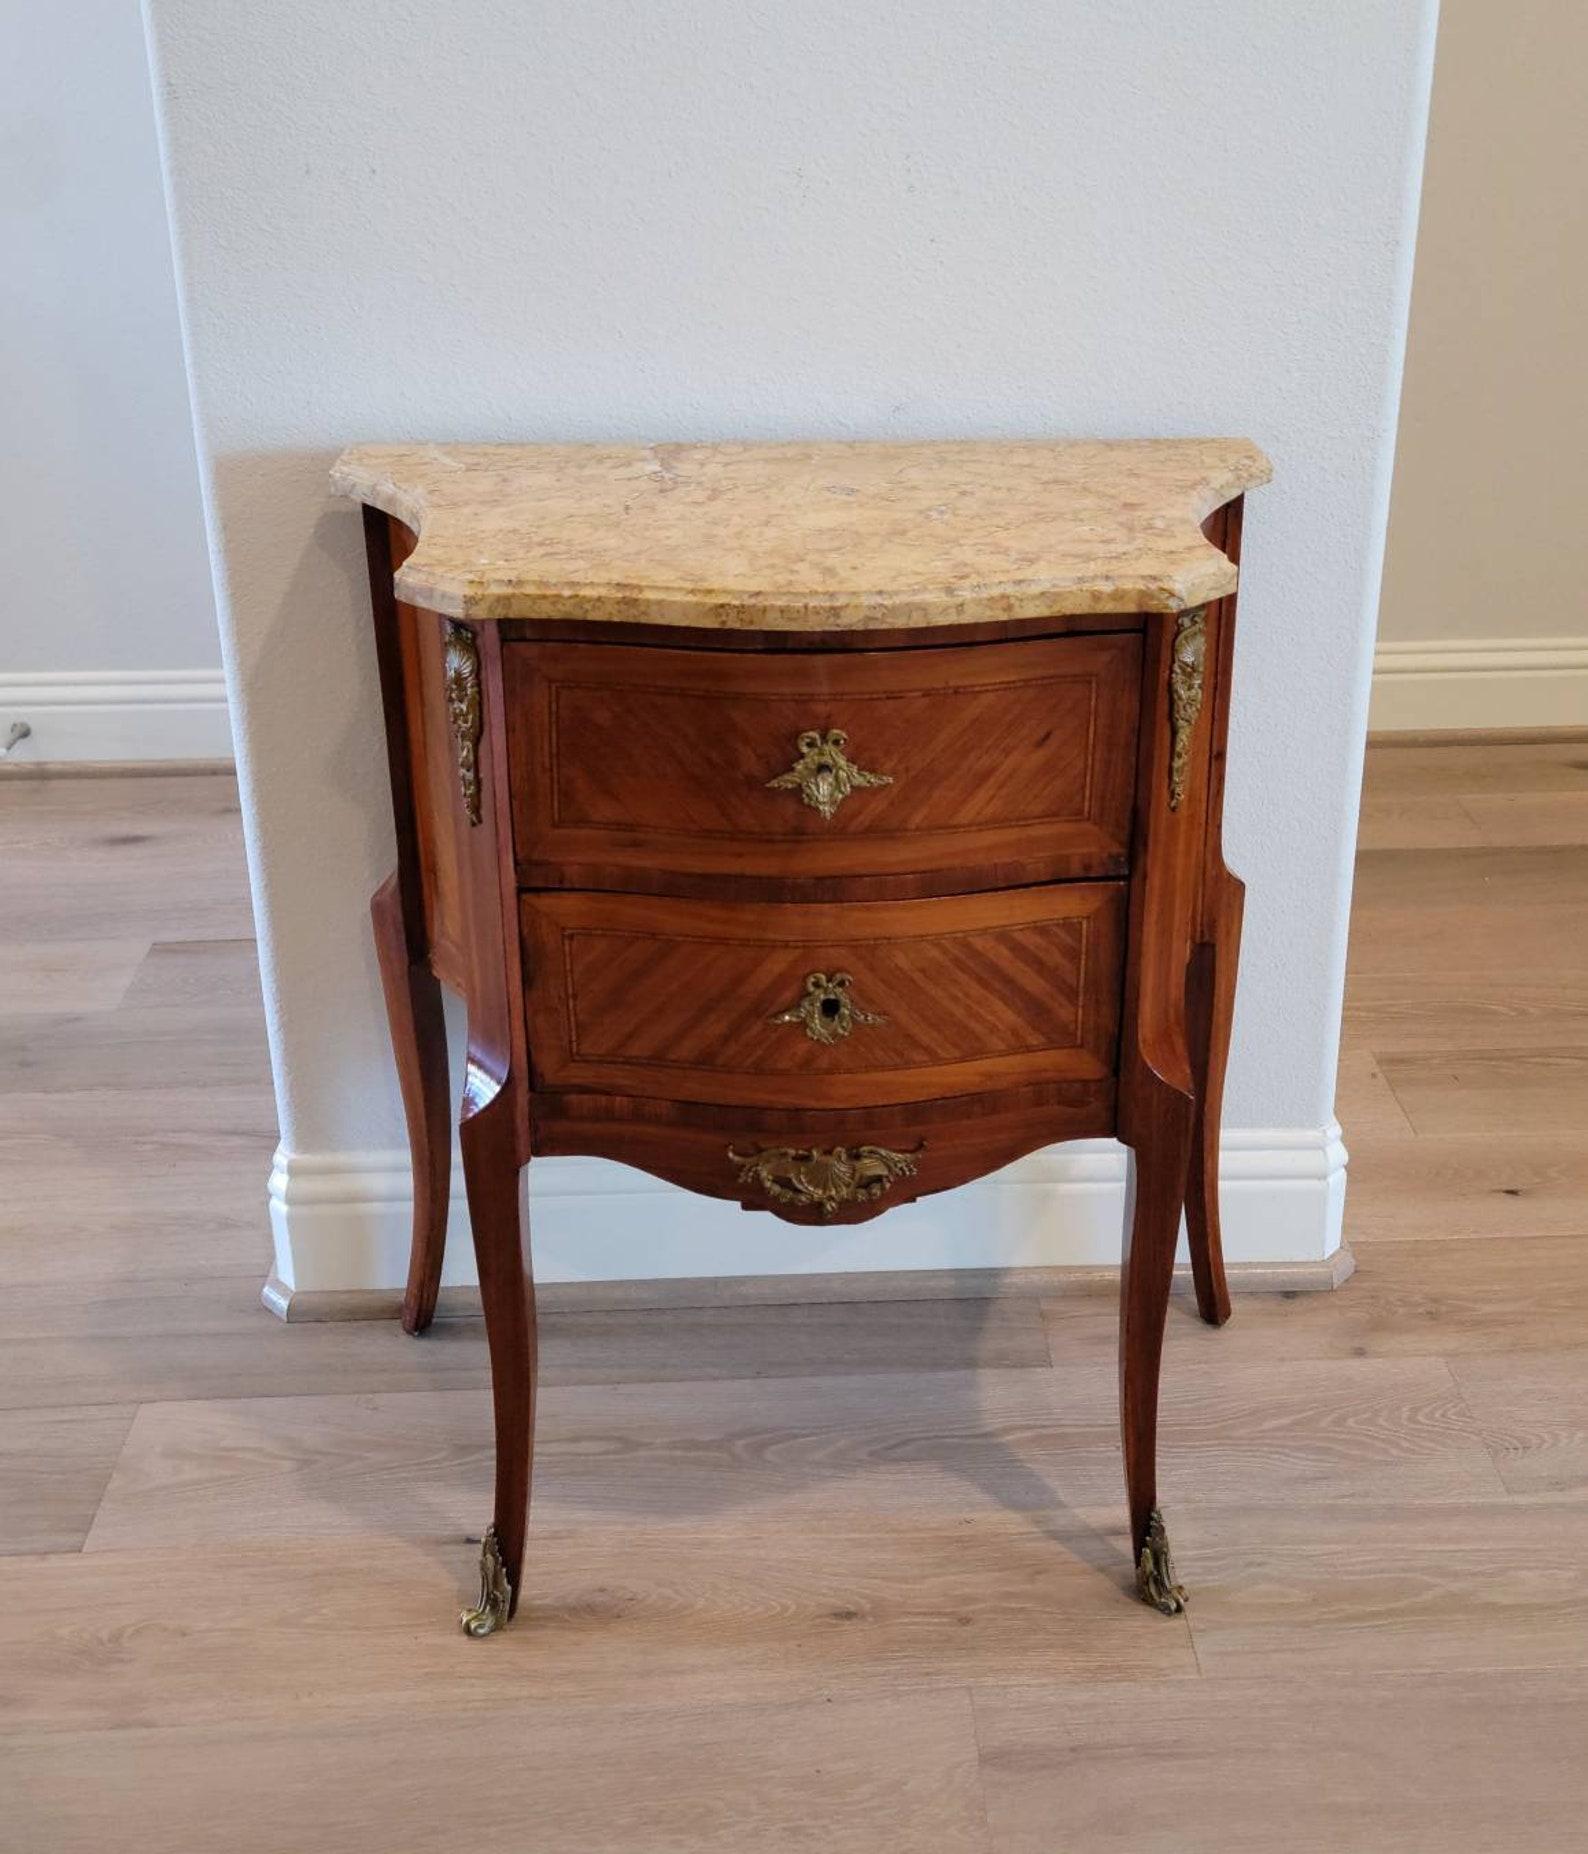 An elegant French Transitional Louis XV - Louis XVI style Kingwood petite sauteuse. circa 1870

Exquisitely hand-crafted in France during the luxurious Belle Époque period of the second half of the 19th century, most likely Parisian work, having a